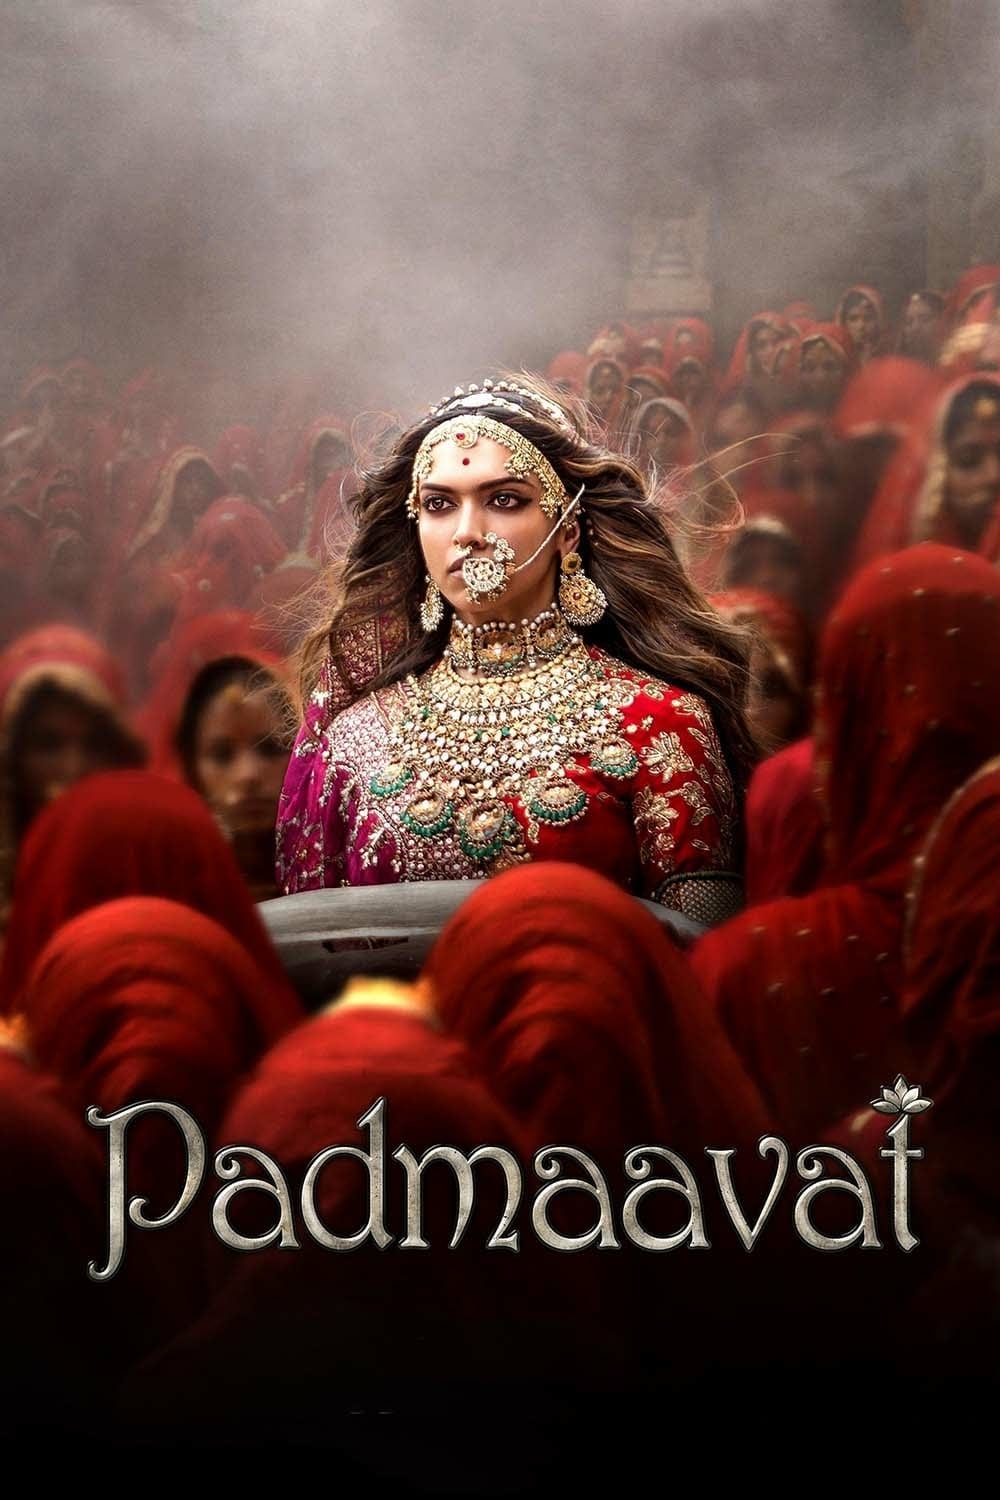 Poster for the movie "Padmaavat"